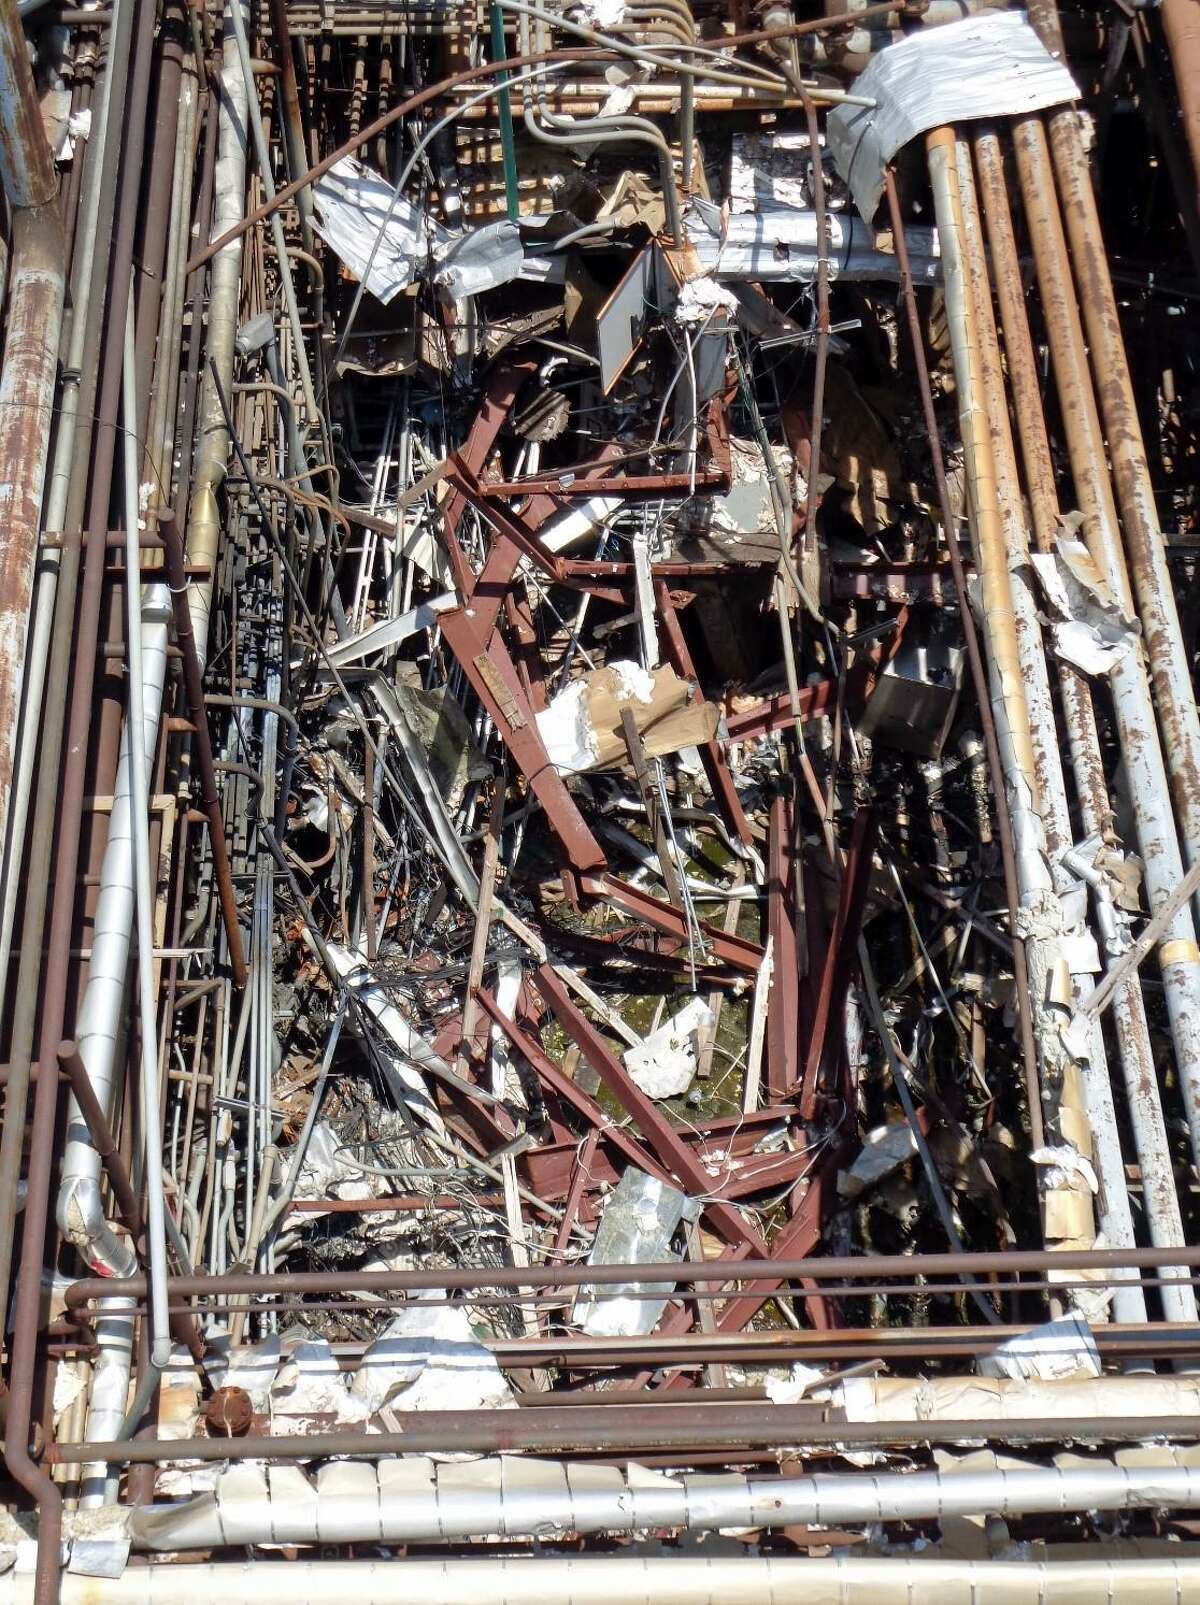 A top view of the plant building showing the condition after the April 2, 2019 fire and explosion at the KMCO plant in Crosby, Texas.